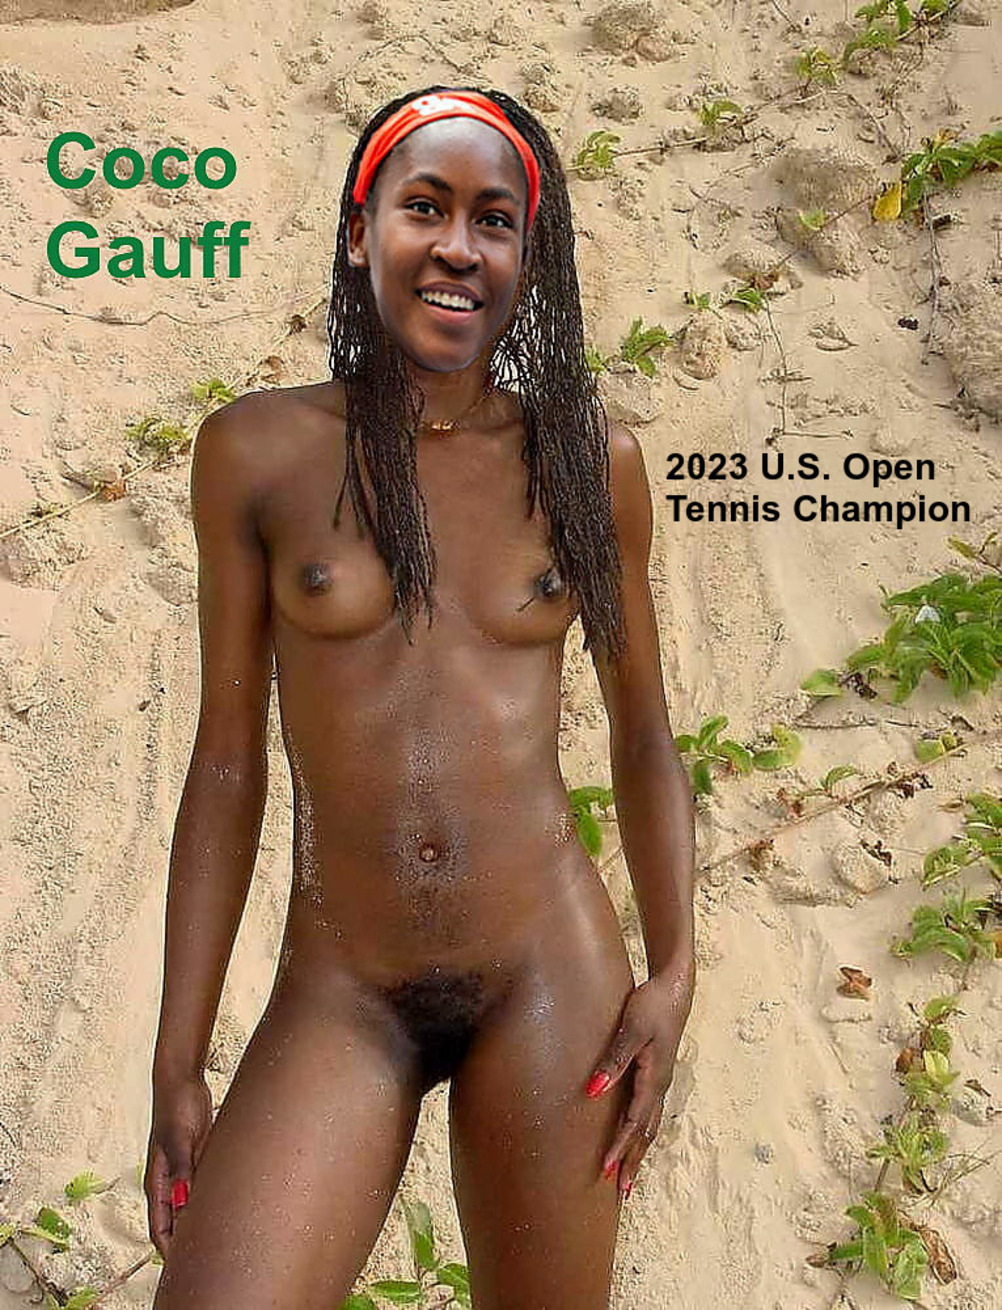 Coco gauff nude pictures